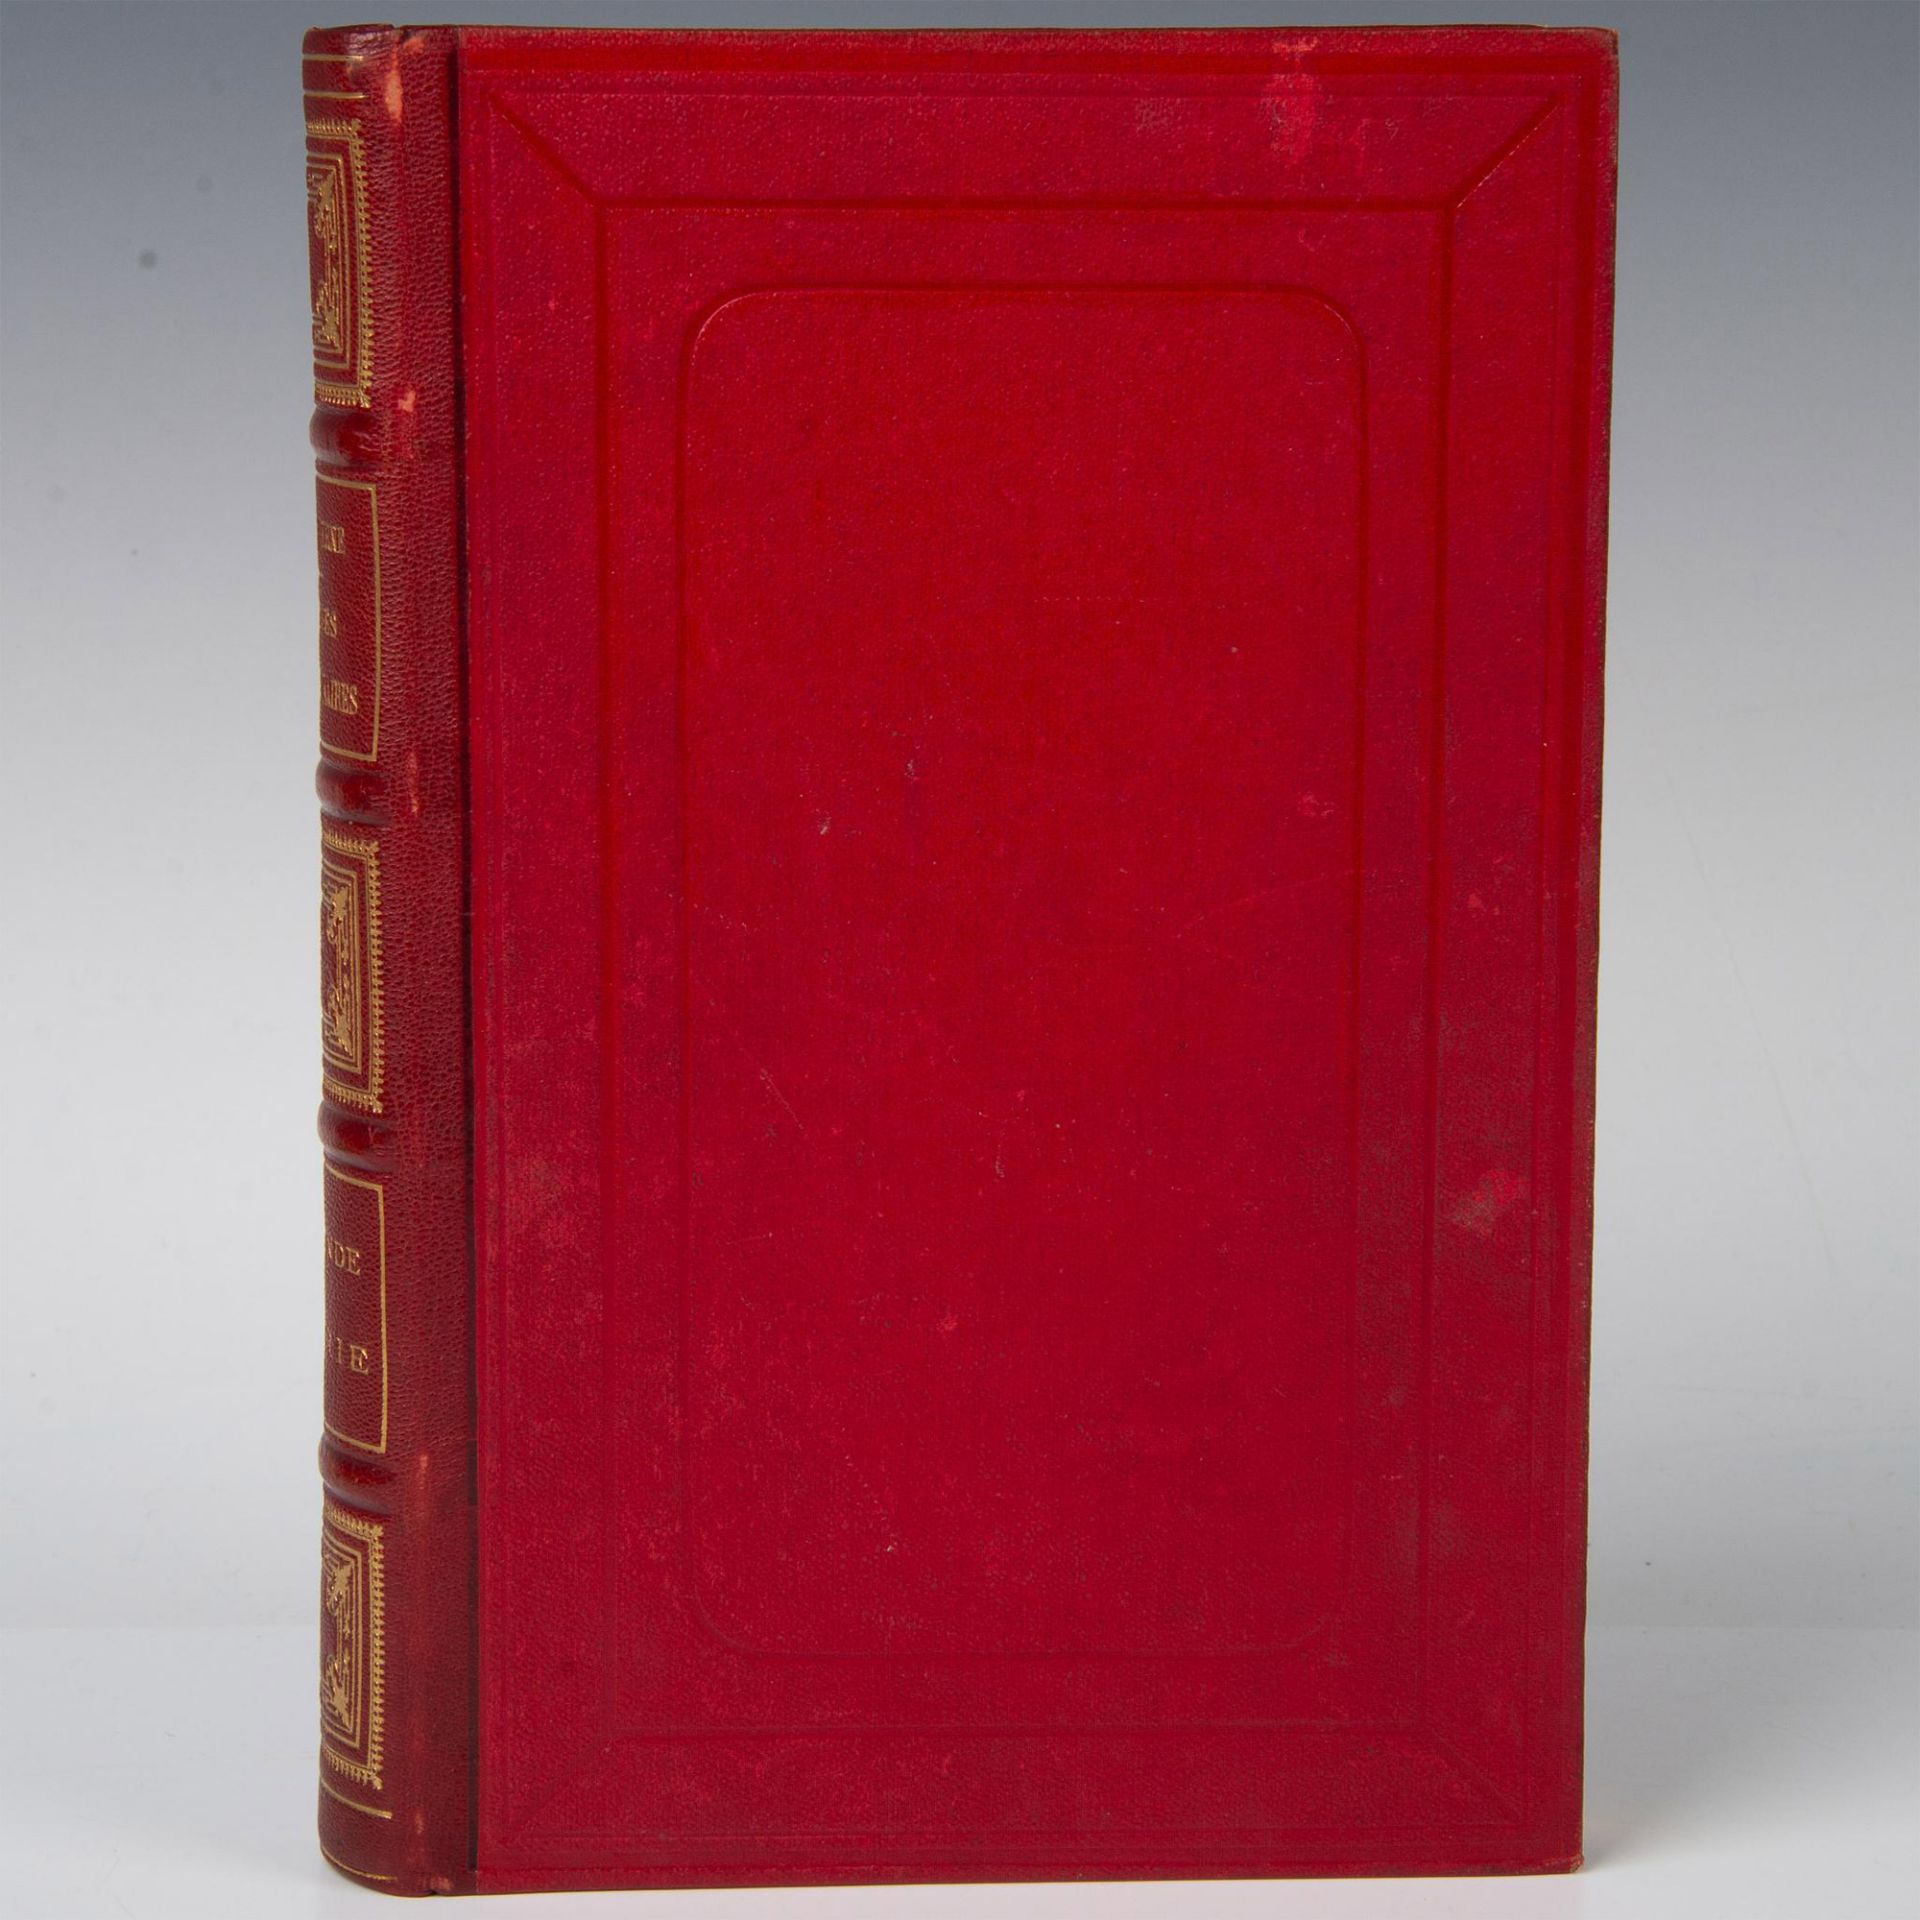 Jules Verne, Seconde Patrie, Aux Harpons, Red Cover - Image 2 of 6